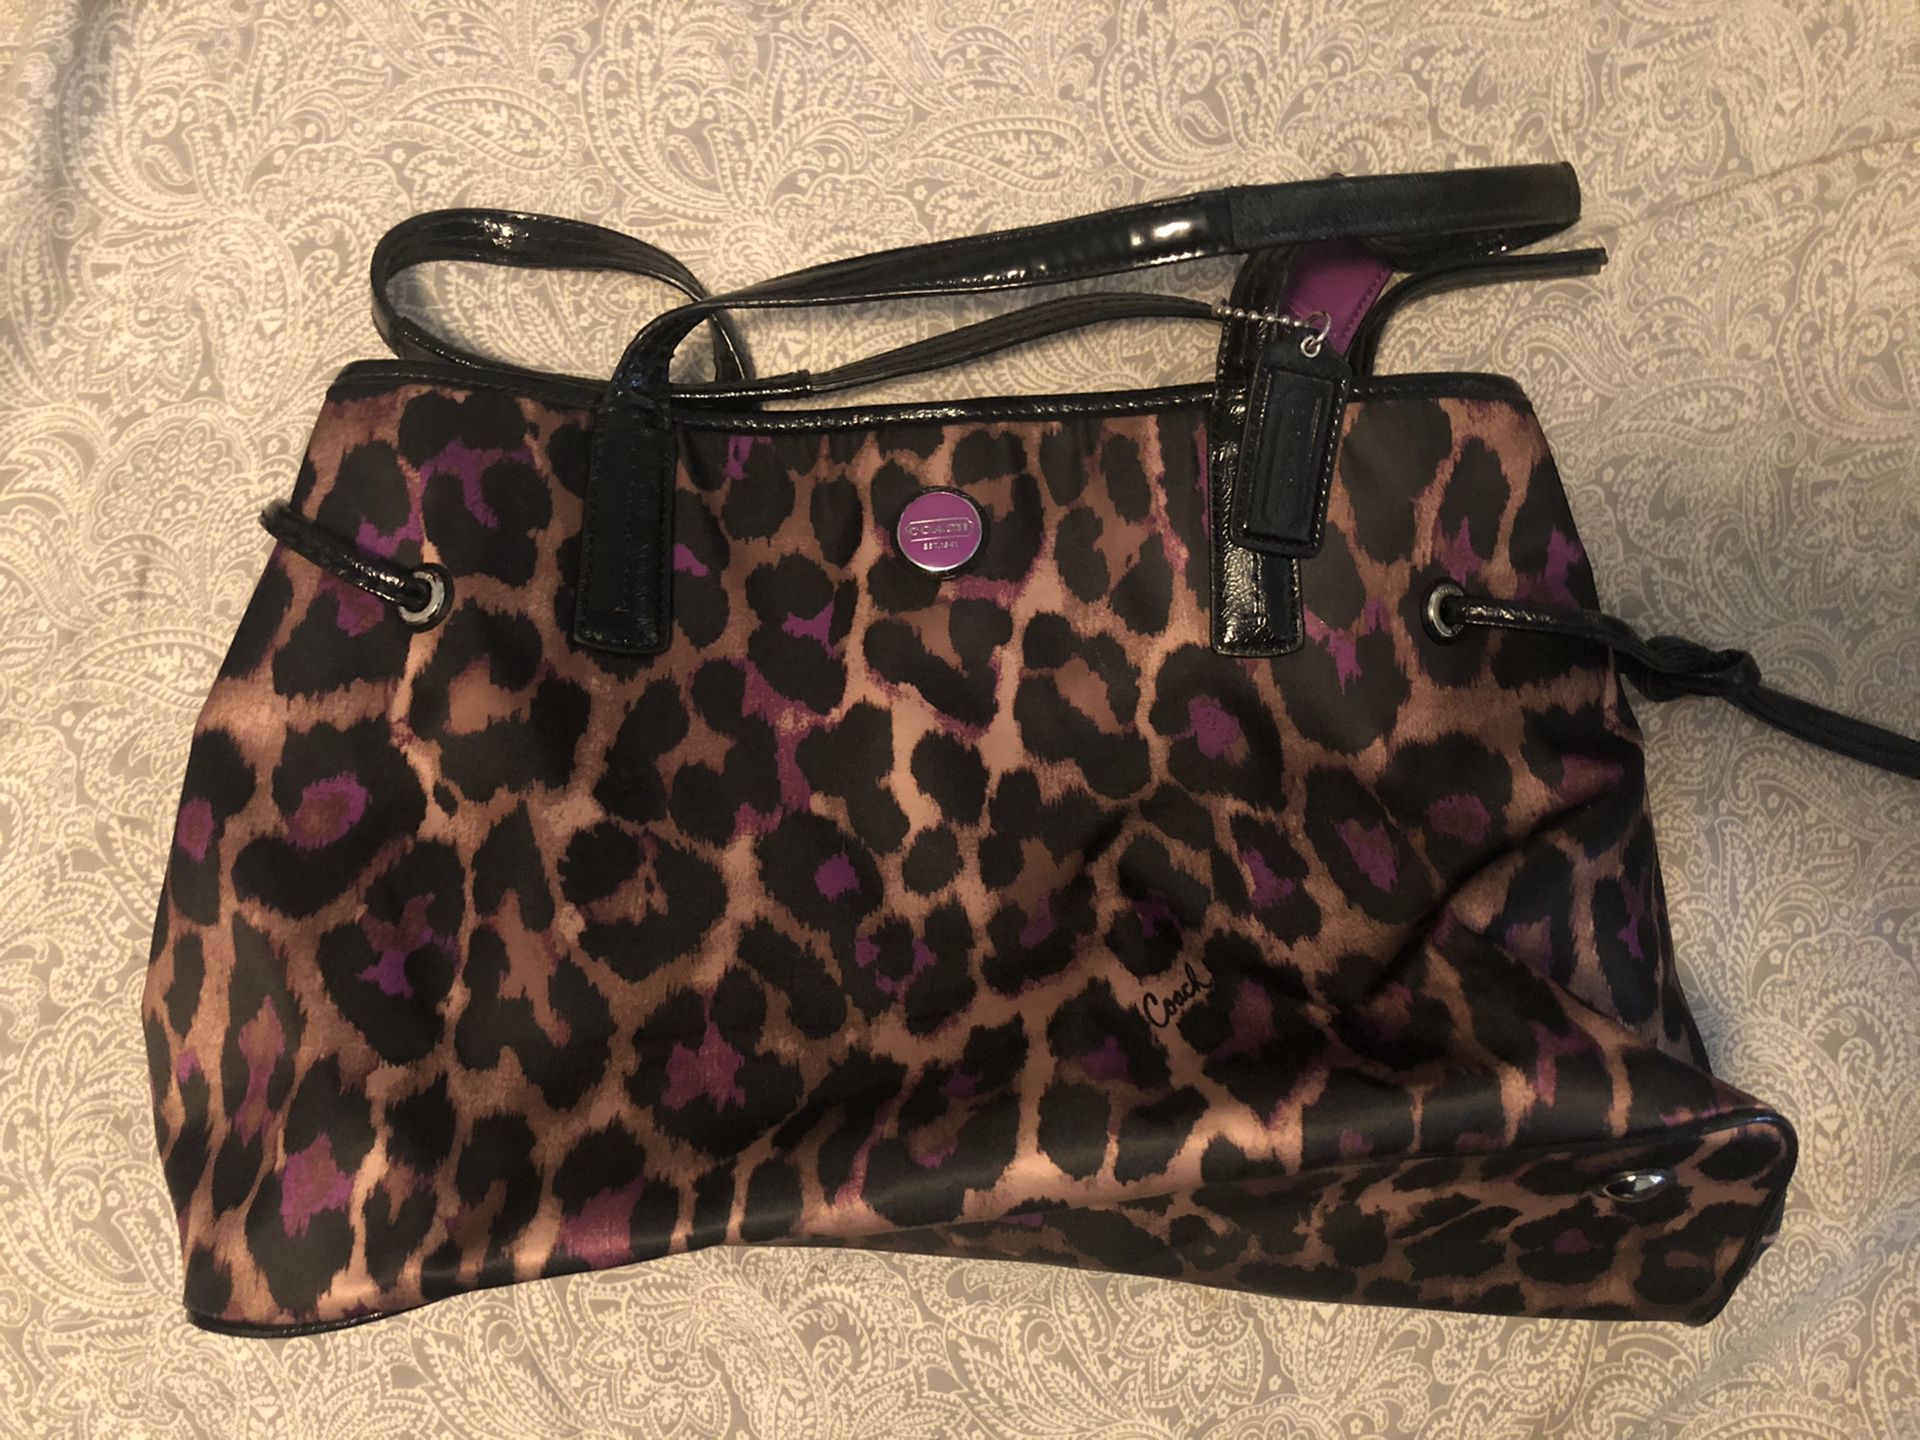 Coach leopard or cheetah print with hints of purple